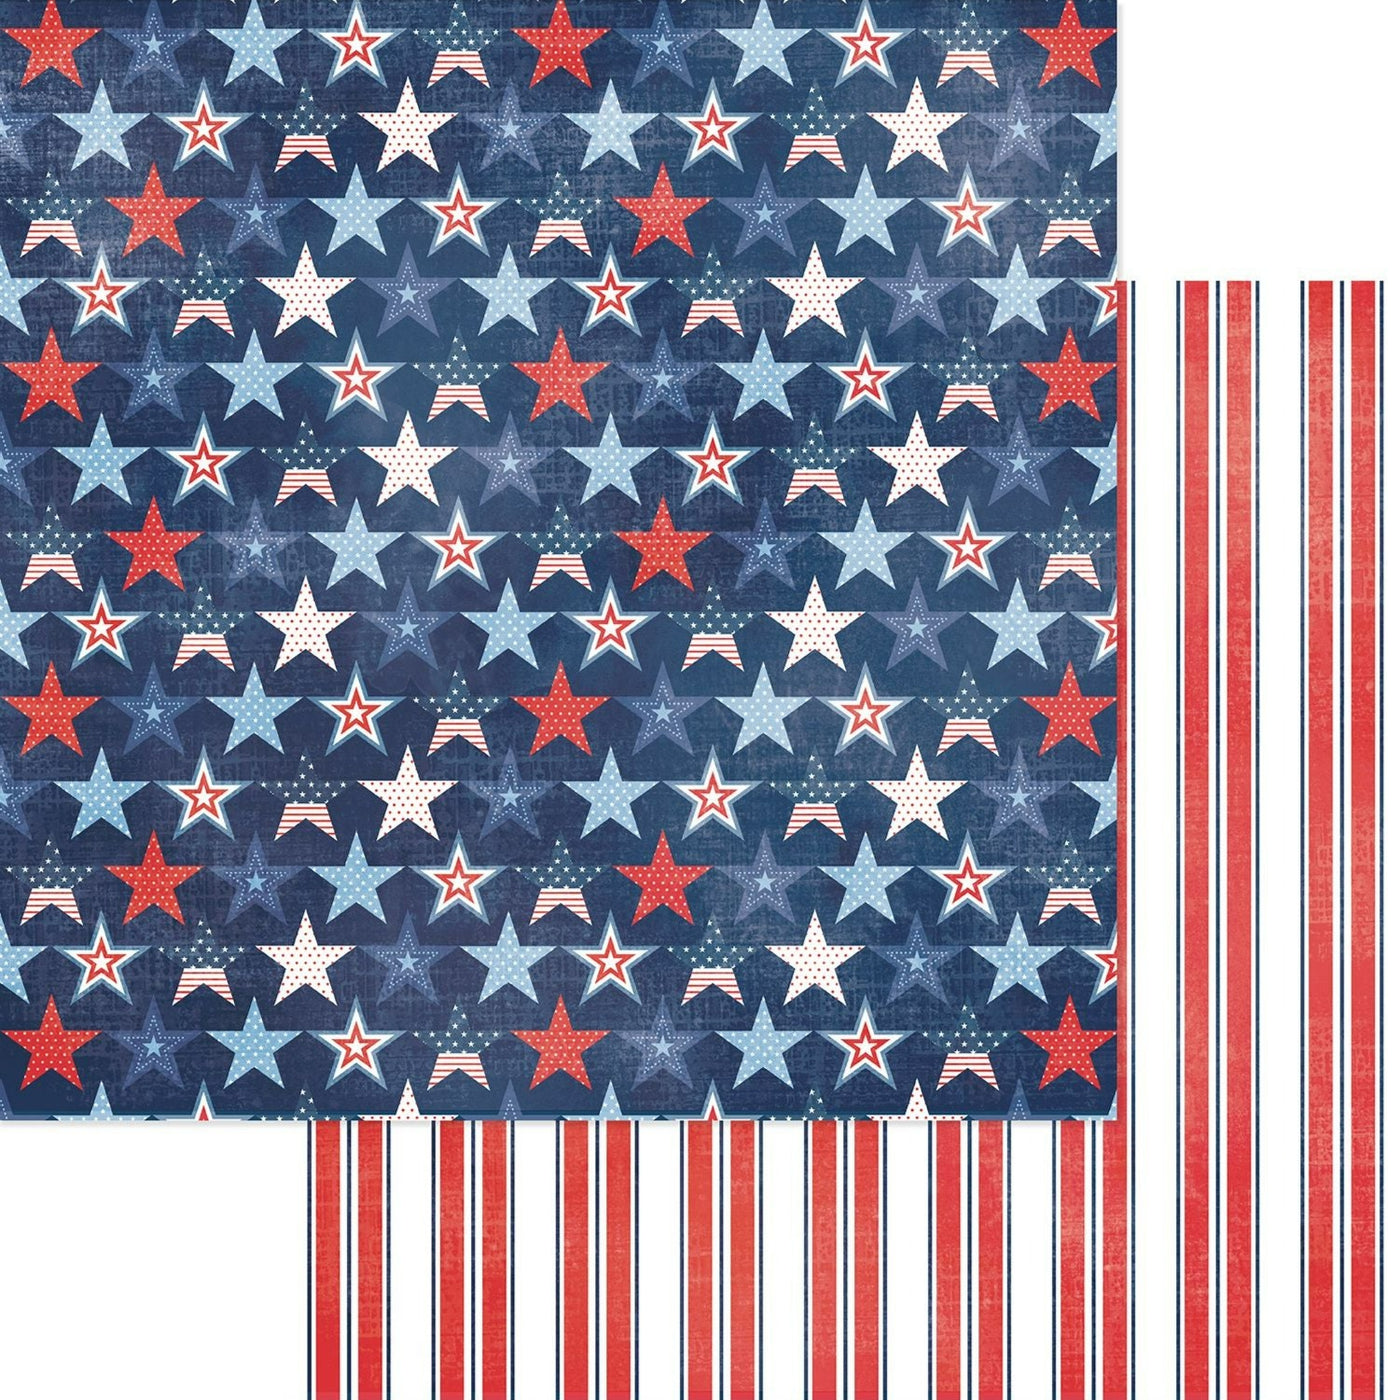 (Side A - rows of patriotic stars on a navy blue background, Side B - red and blue stripes on a white background)